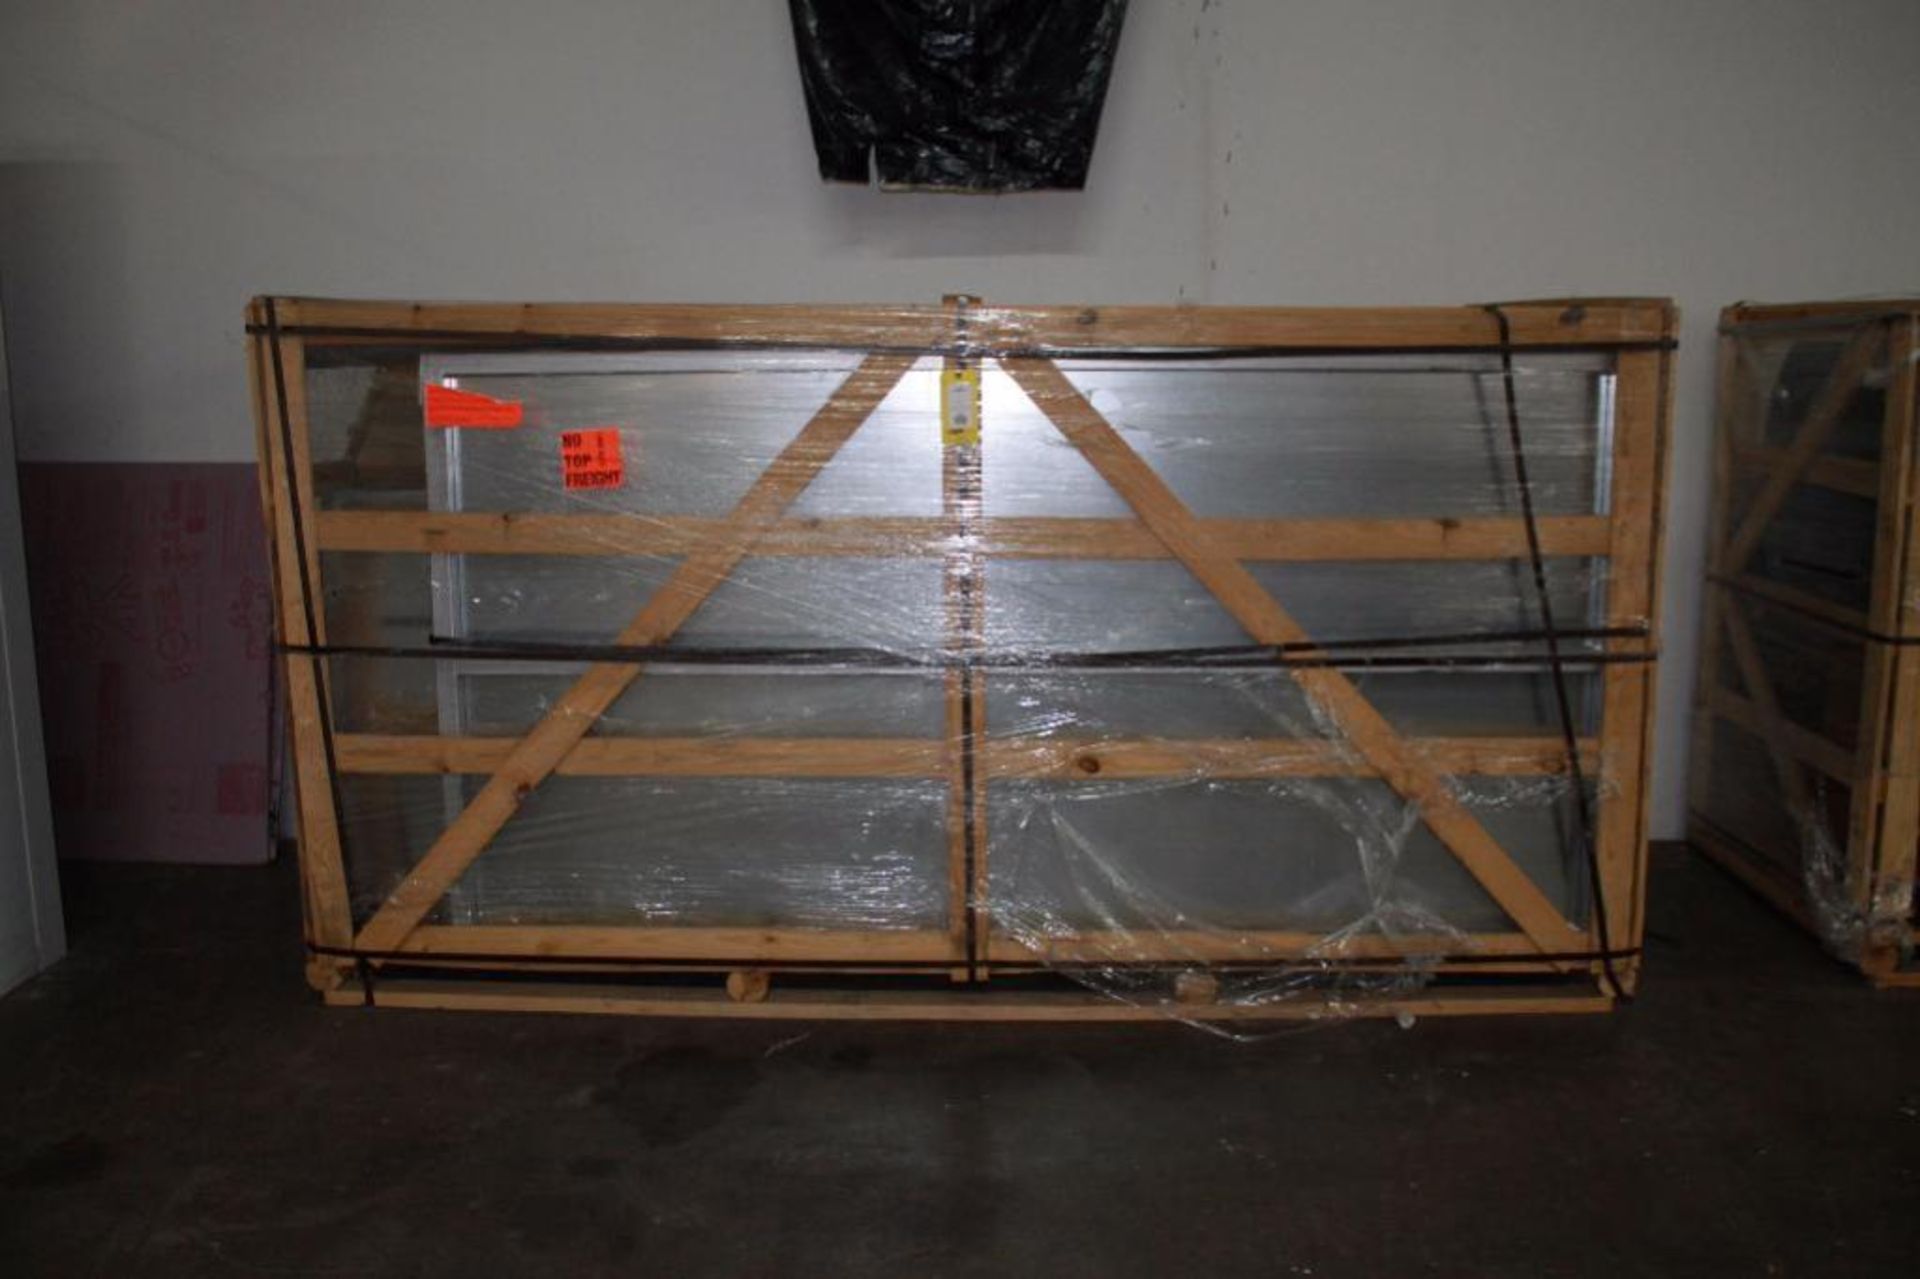 Unassembled Spray Paint Booth in (2) Shipping Crates - Image 2 of 3